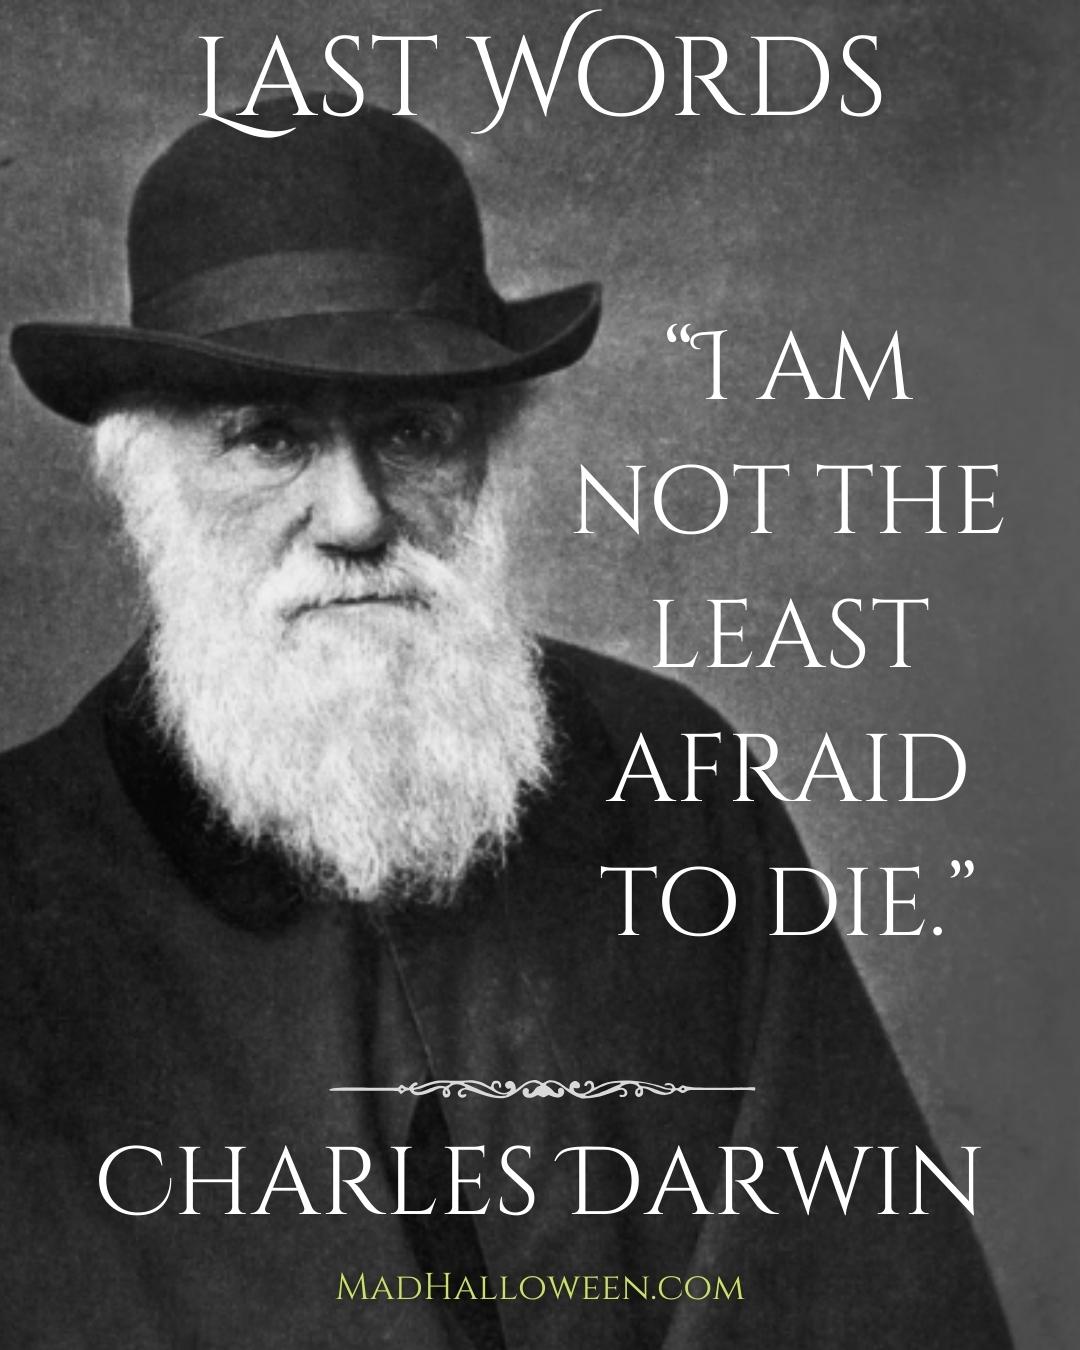 Famous Last Words Quotes of the Departed - Charles Darwin - Mad Halloween